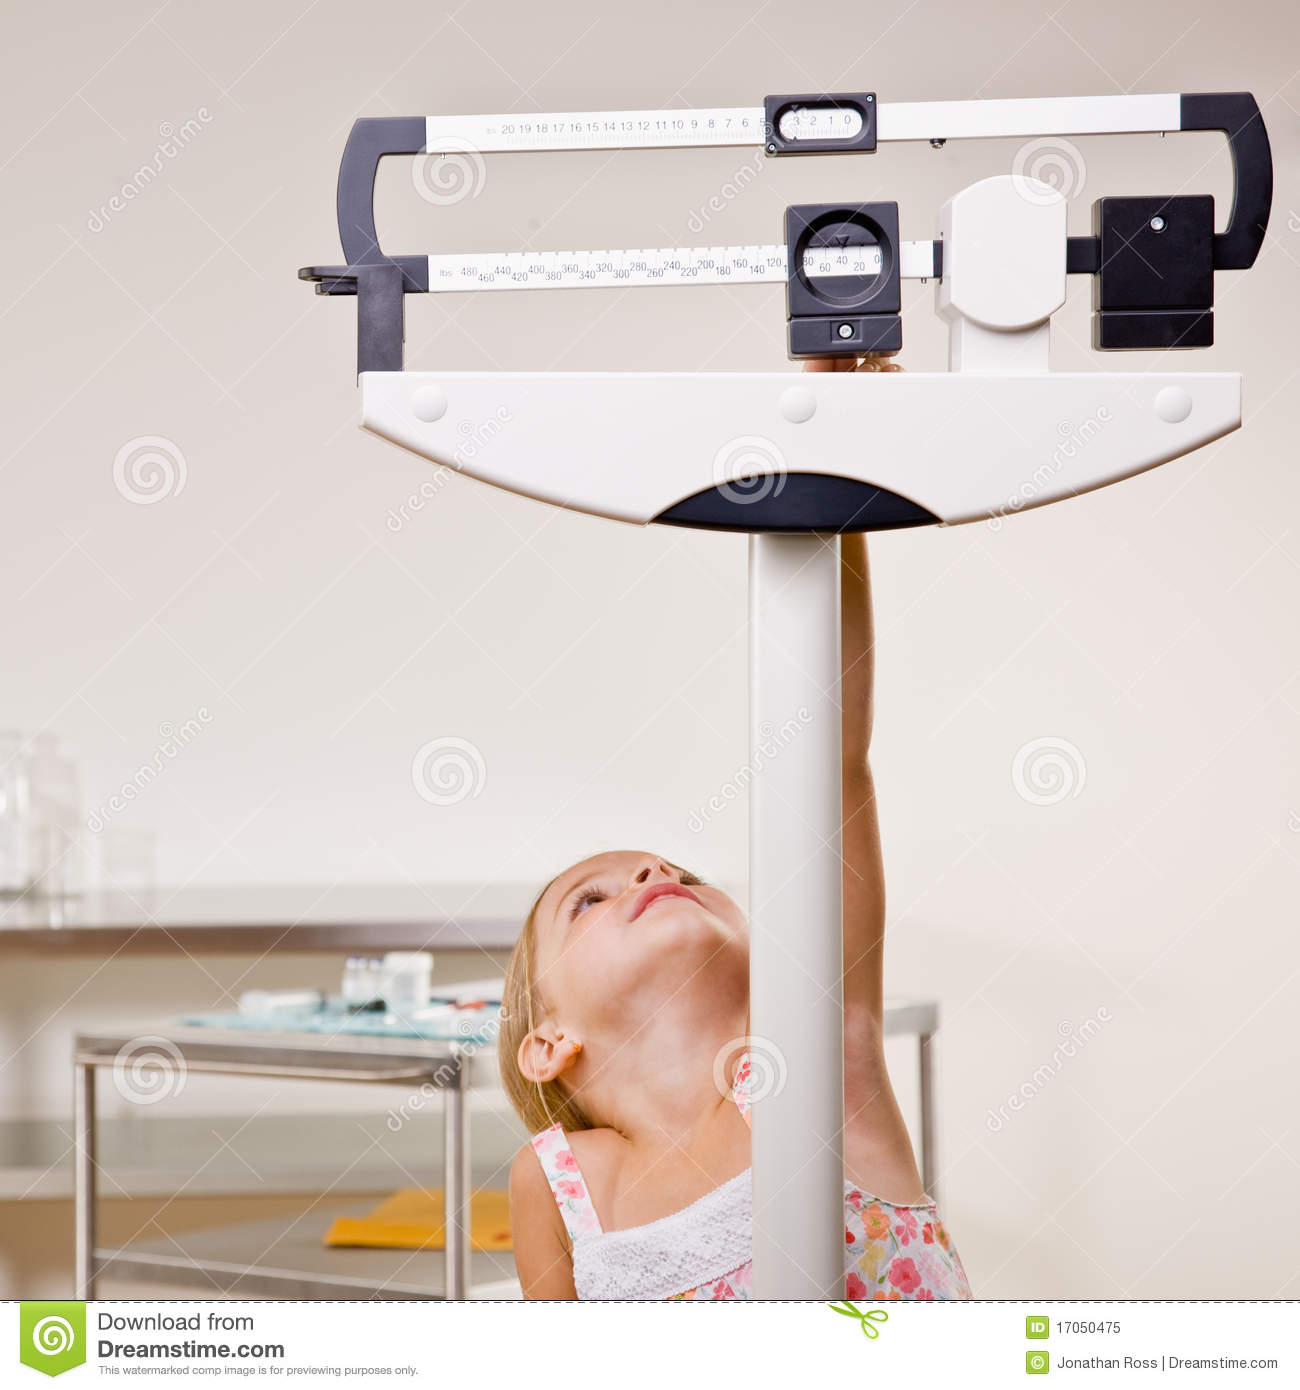     Similar Stock Images Of   Girl Weighing Herself In Doctor Office